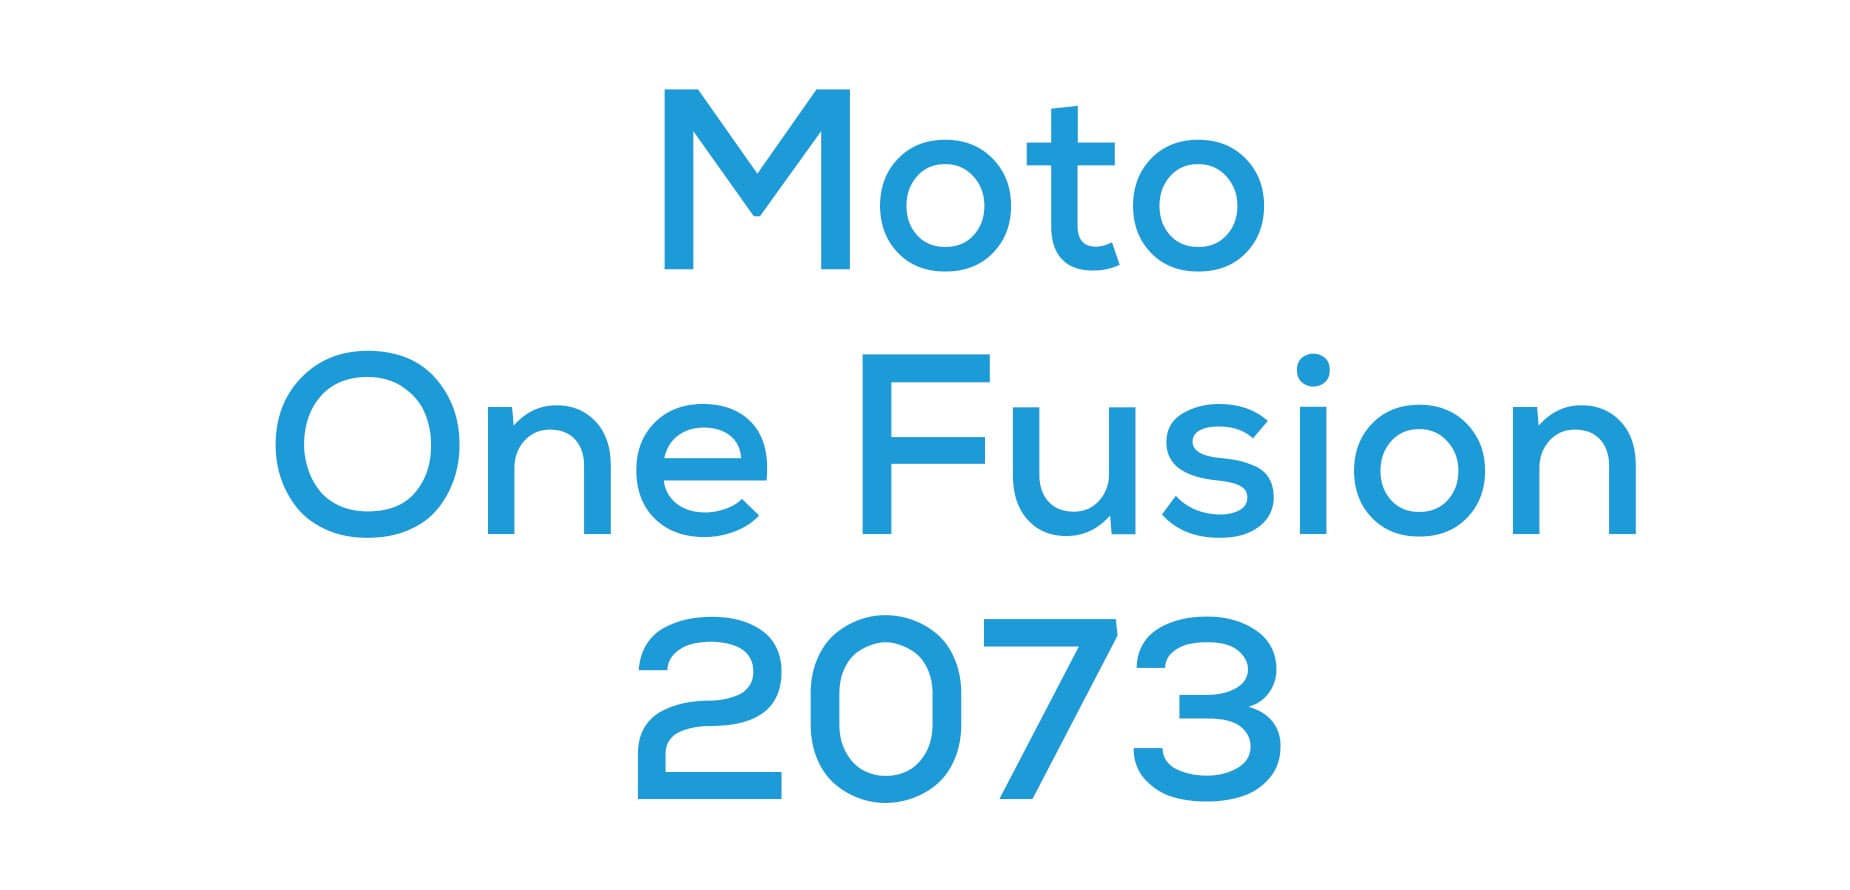 One Fusion (2073)